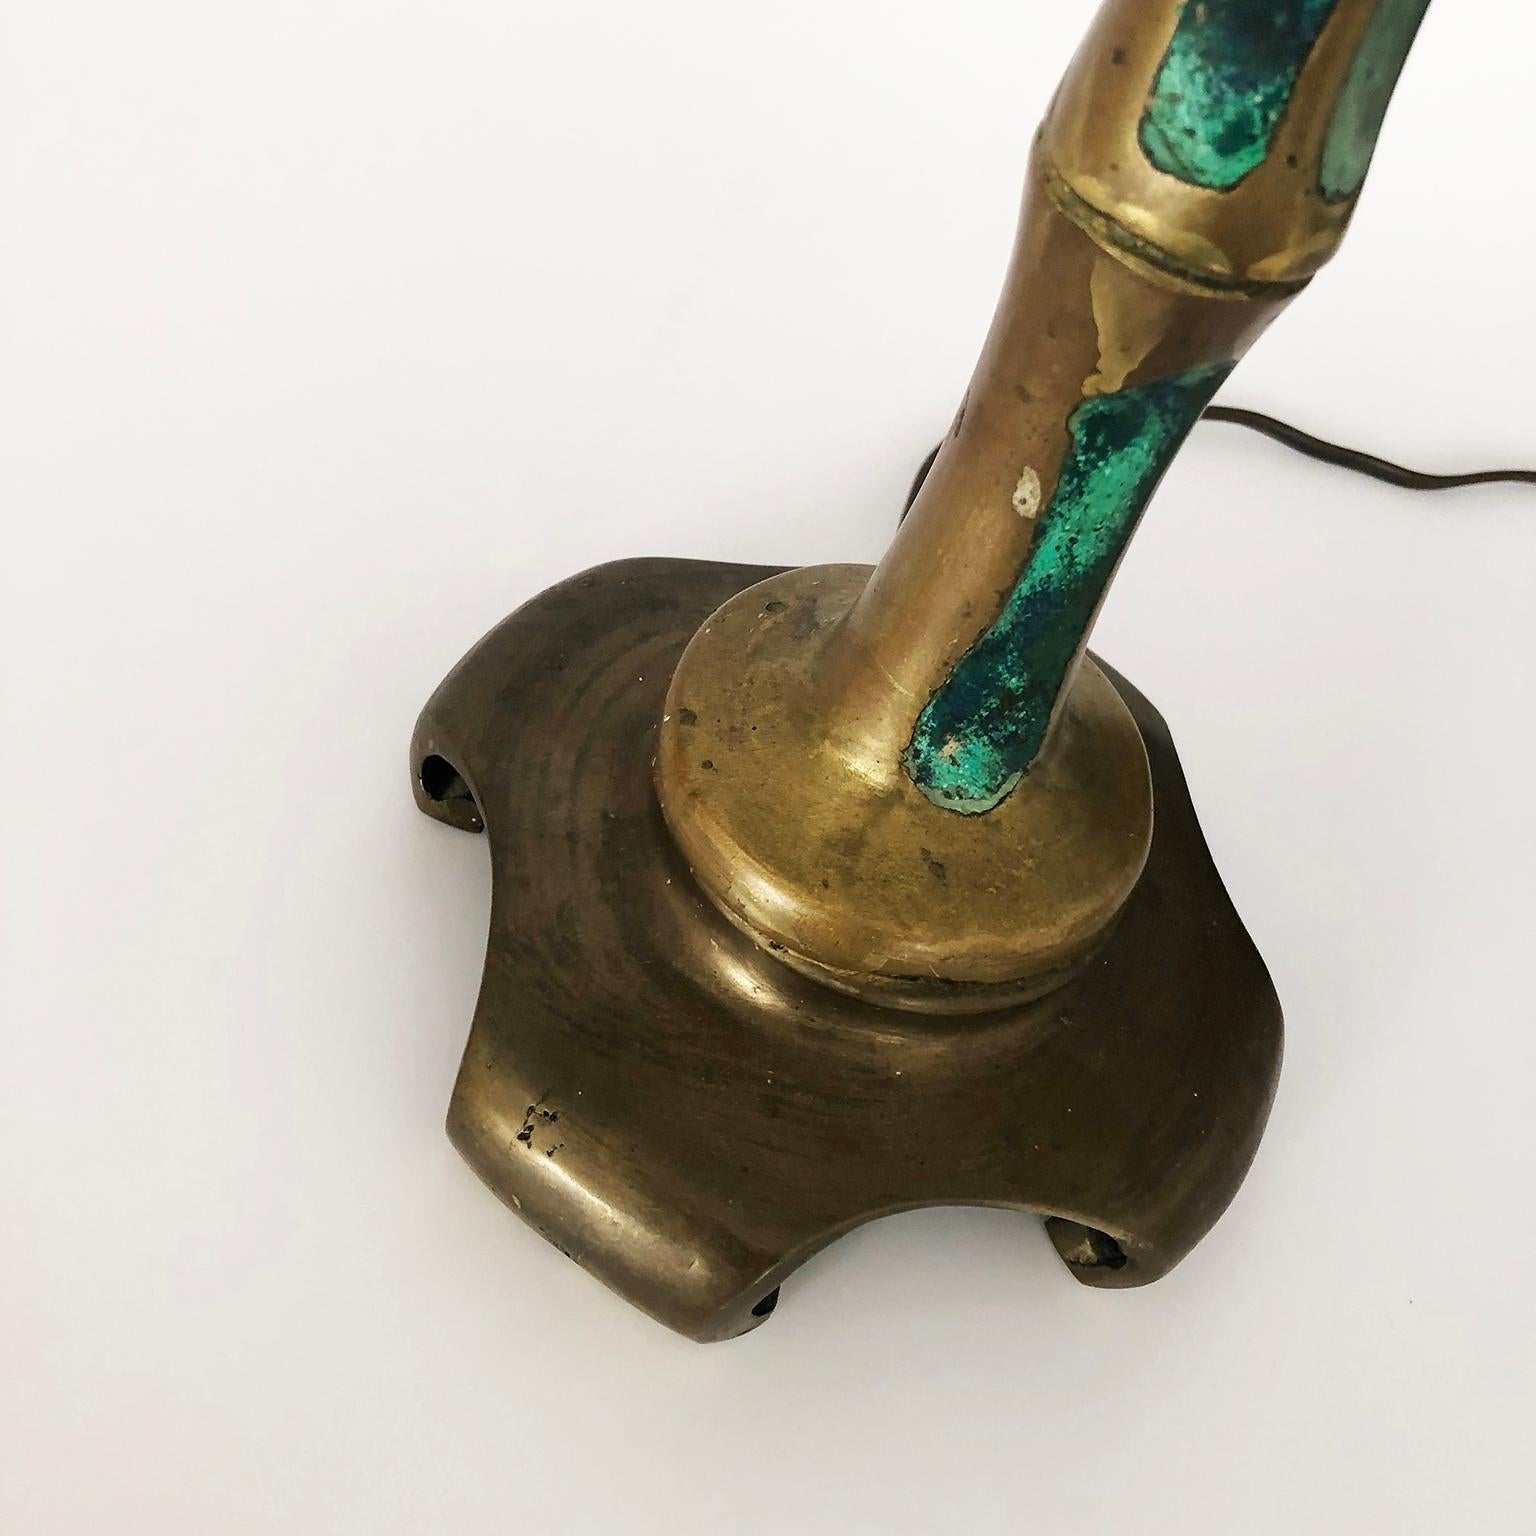 We offer this rare and original fantastic big size table lamp designed by Pepe Mendoza made in solid bronze and ceramic inlay technique, circa 1950.

Designer, Pepe Mendoza ran a foundry in Mexico that produced a limited number of furniture pieces